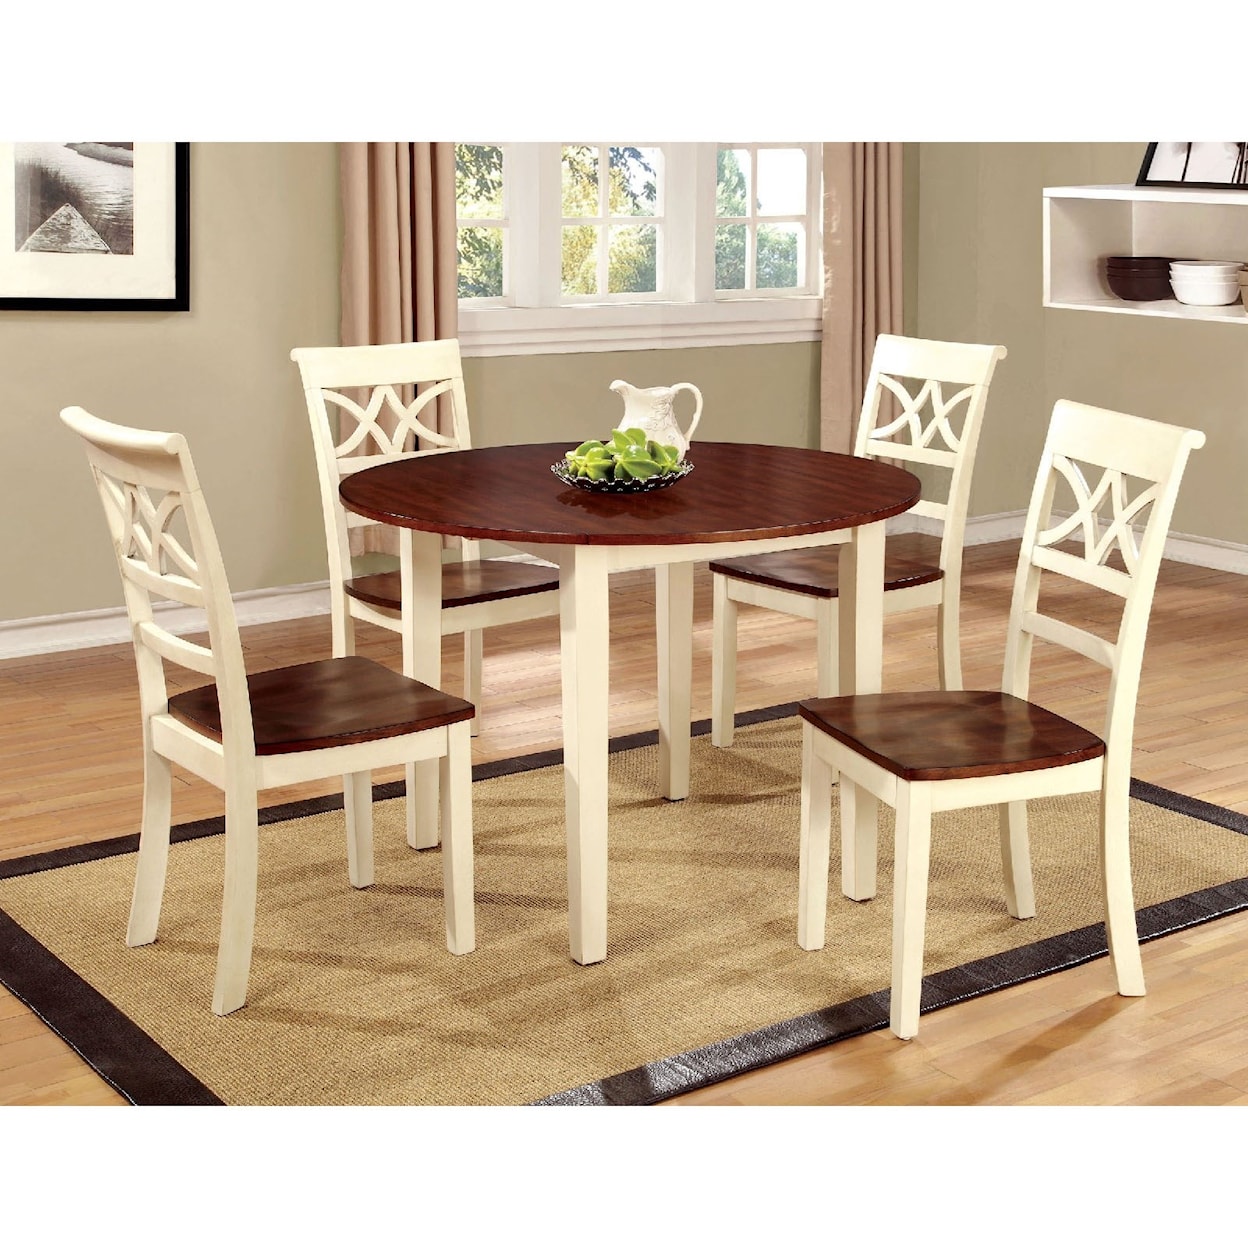 Furniture of America Dover II Round Table w/ Drop Leaf